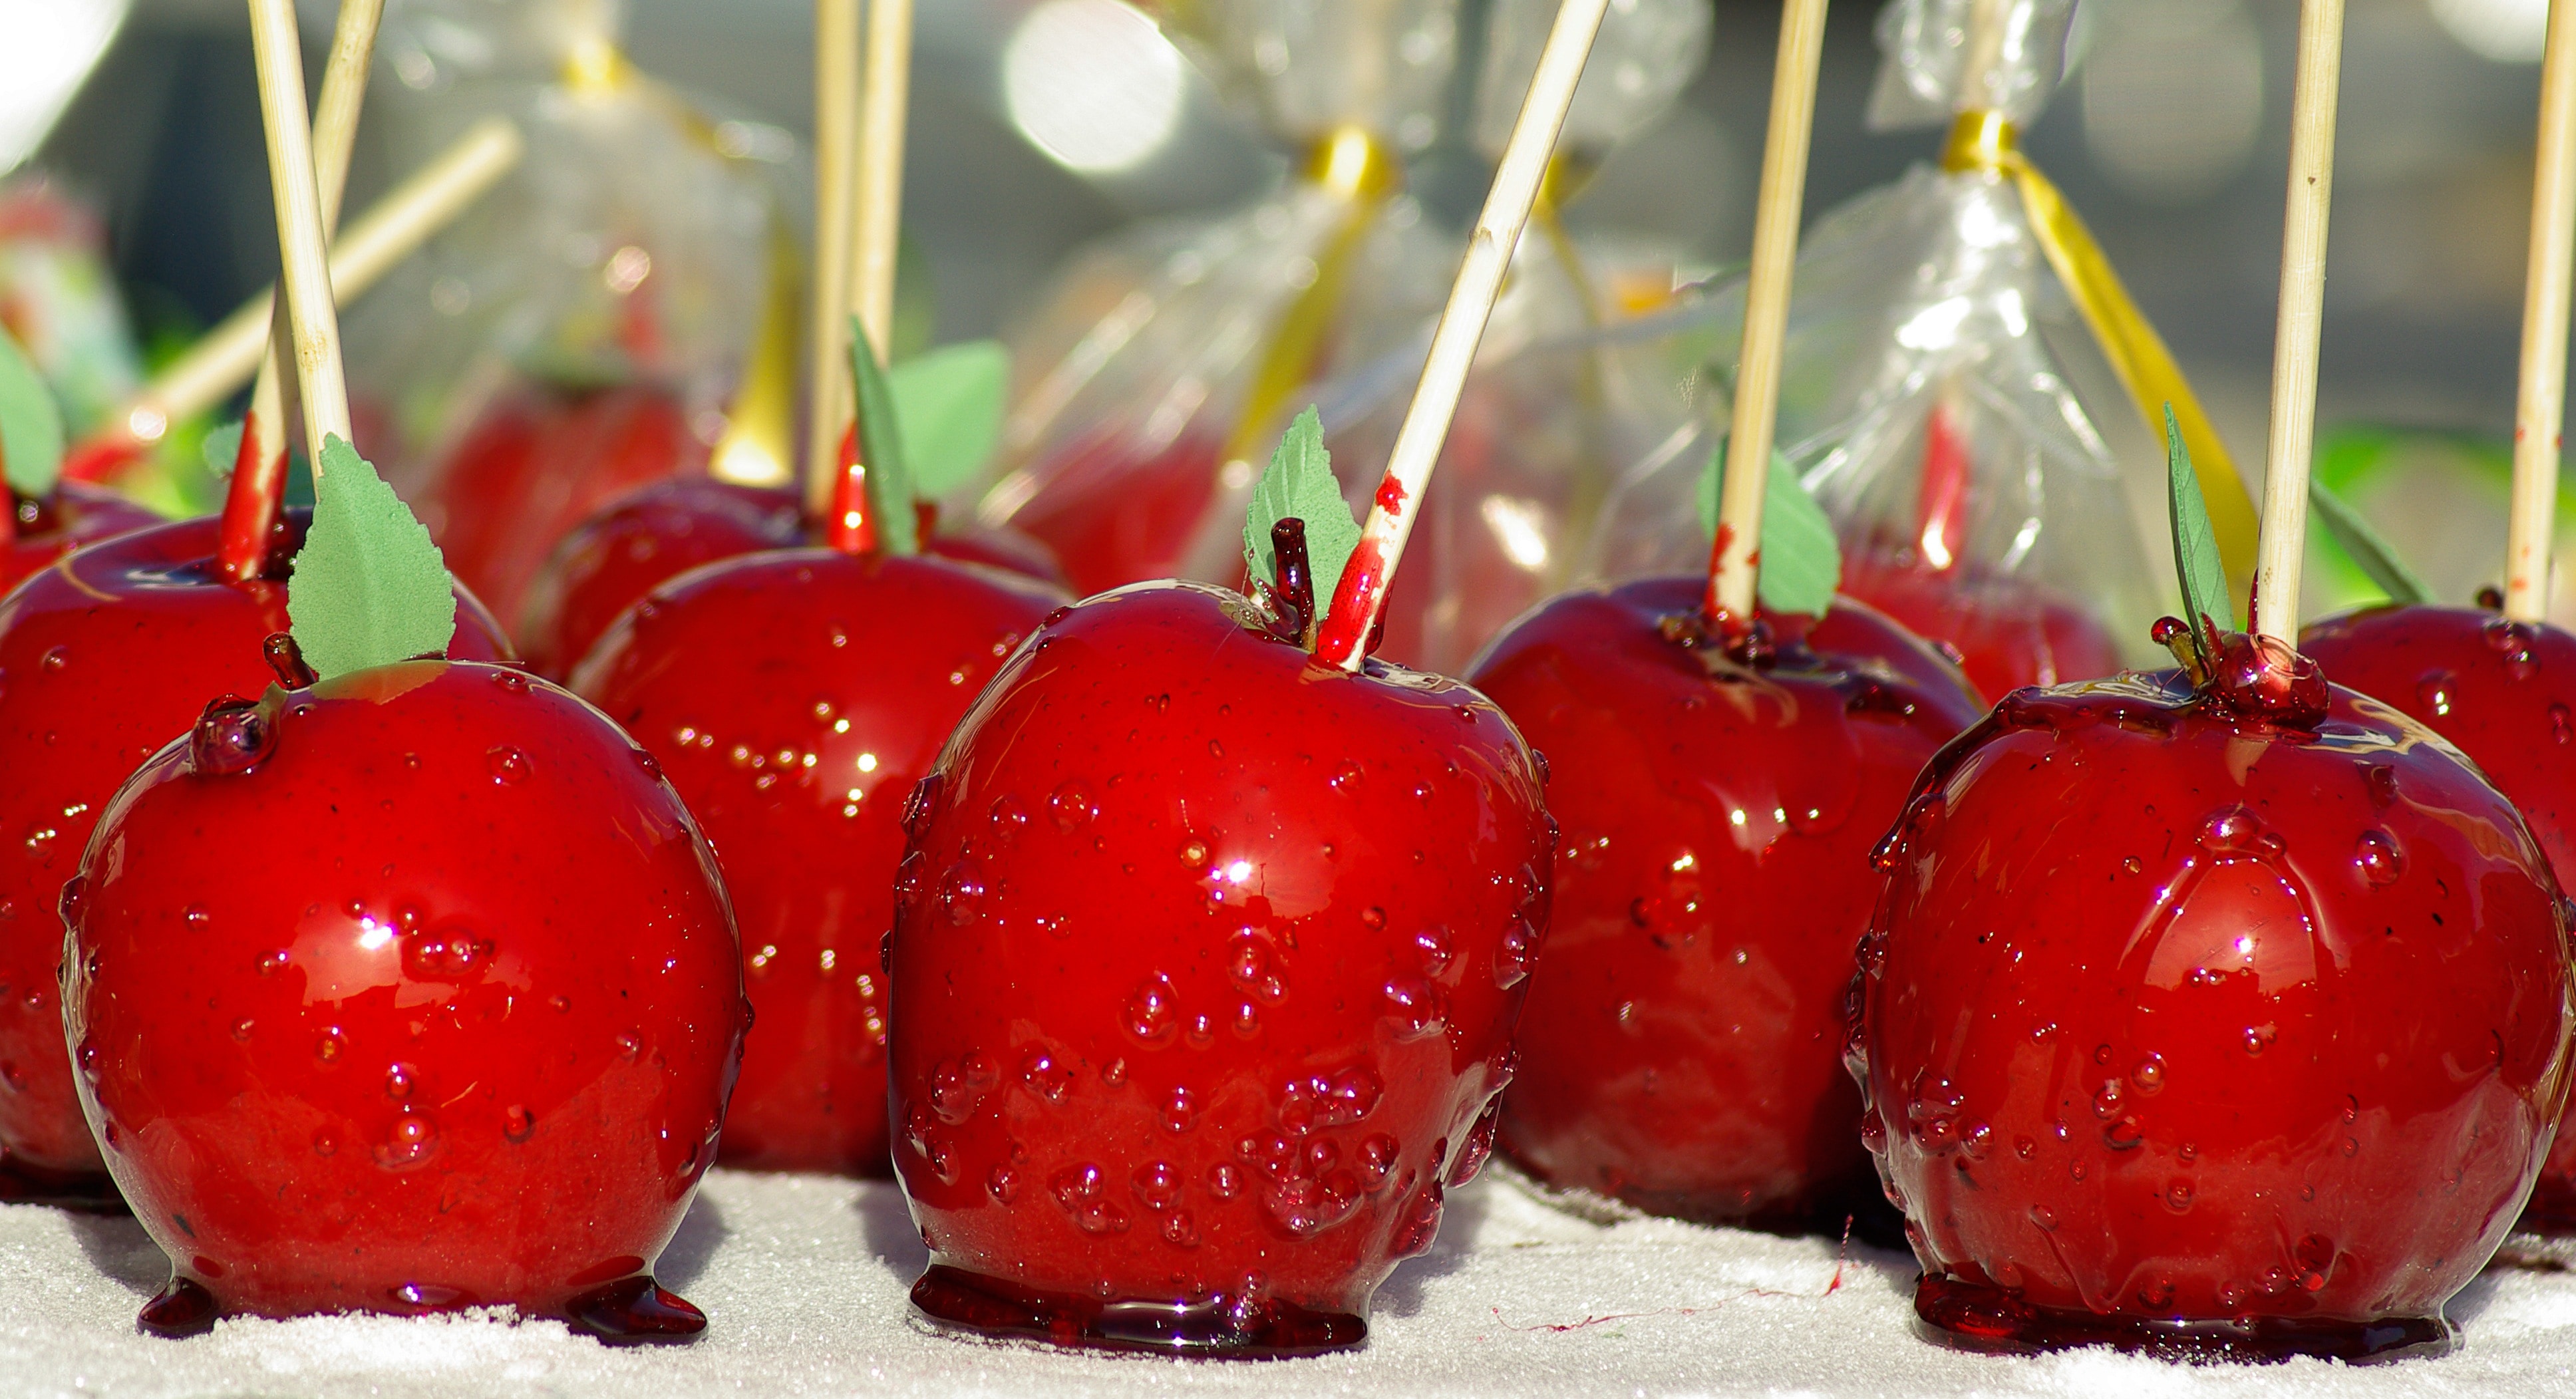 Love Apples, Candied, Red Apples, red, food and drink